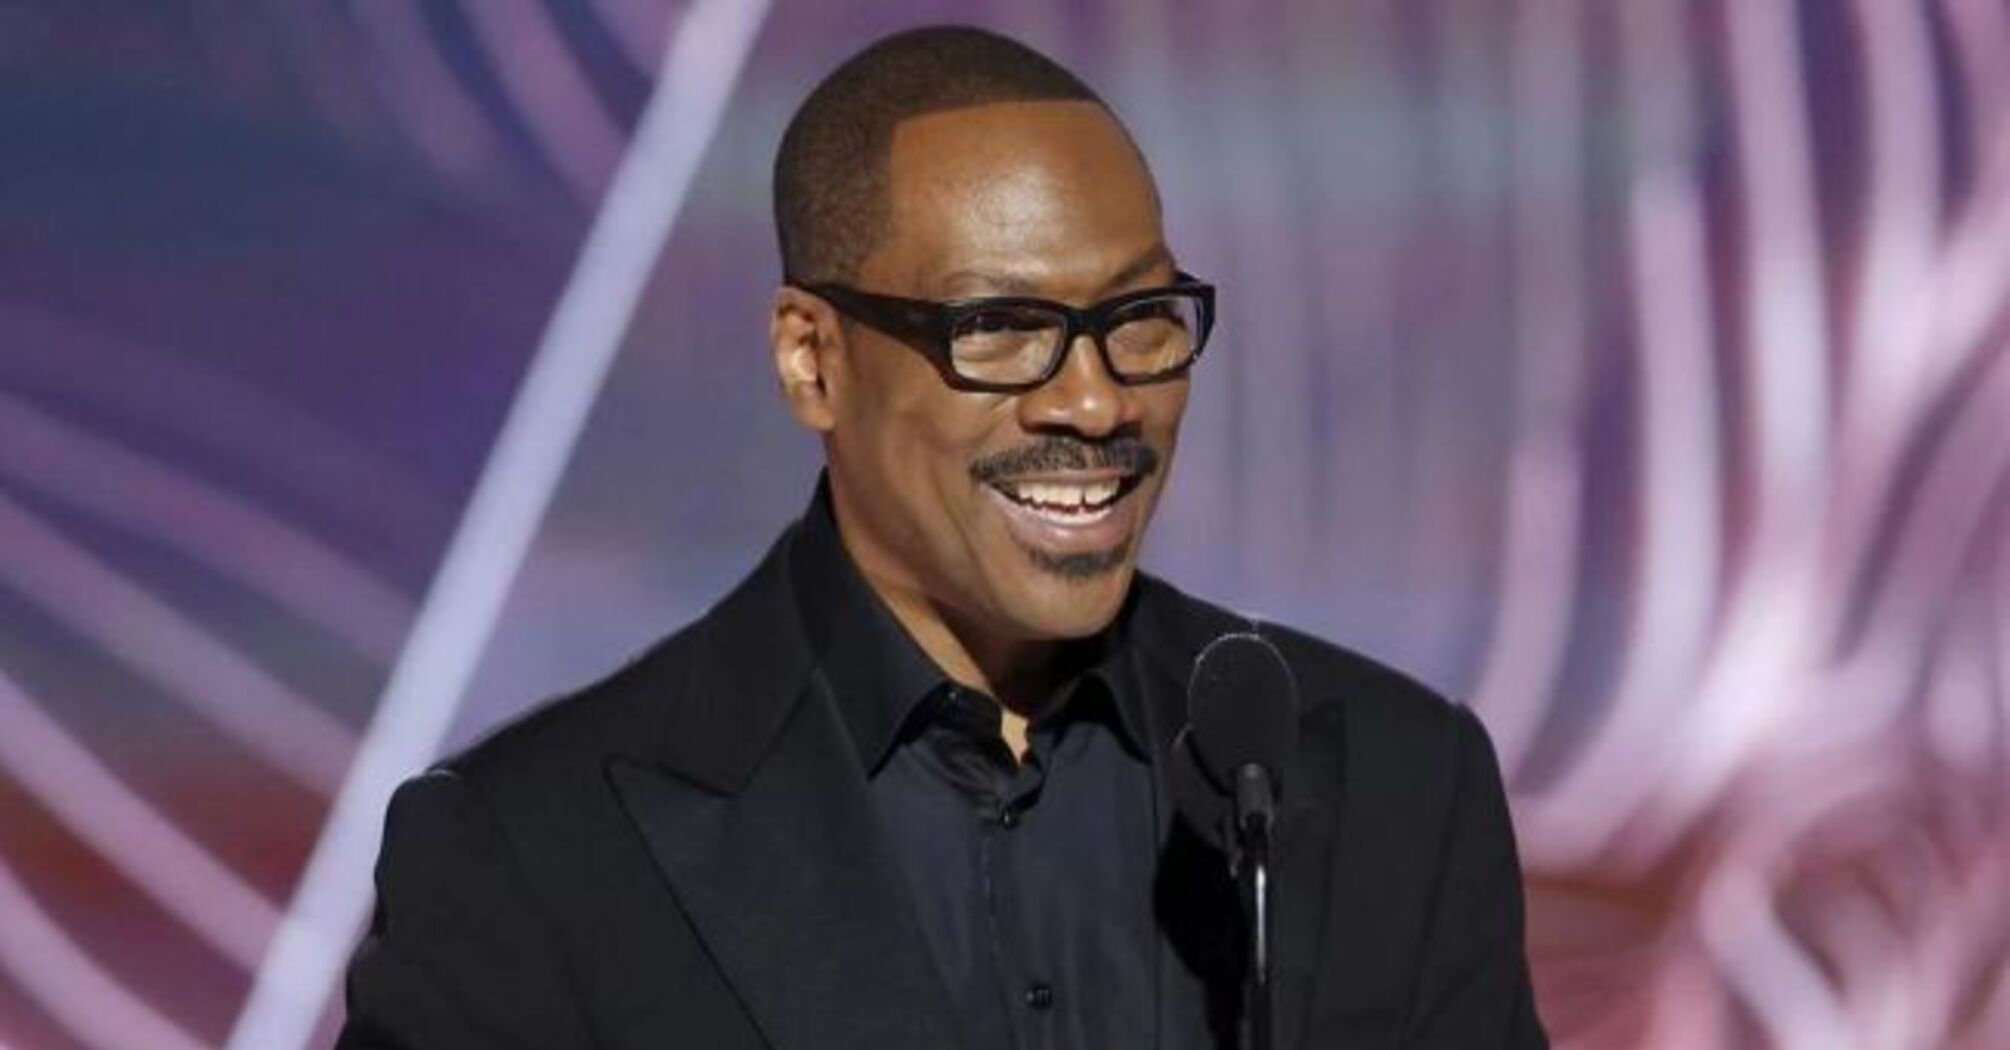 5 little-known facts about Eddie Murphy